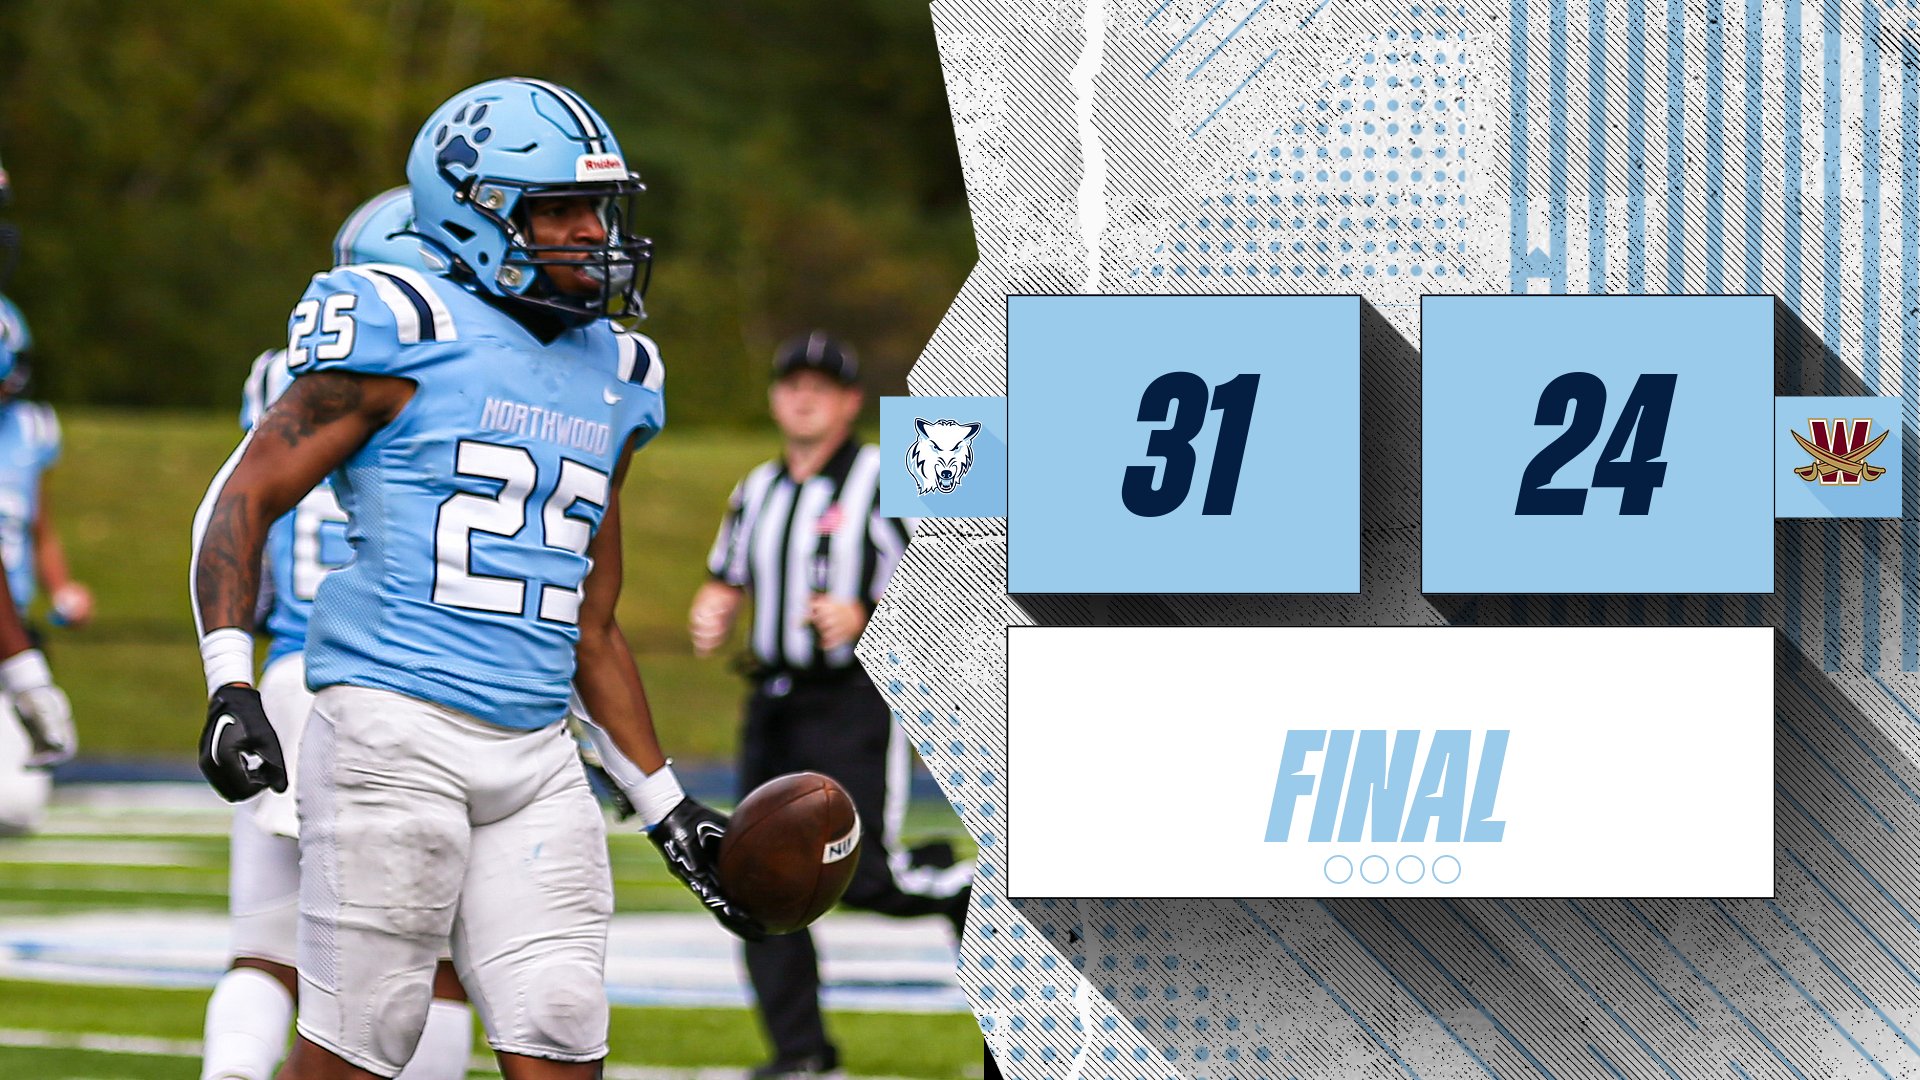 Football Wins Third Straight - Defeating Walsh 31-24 To Conclude Season